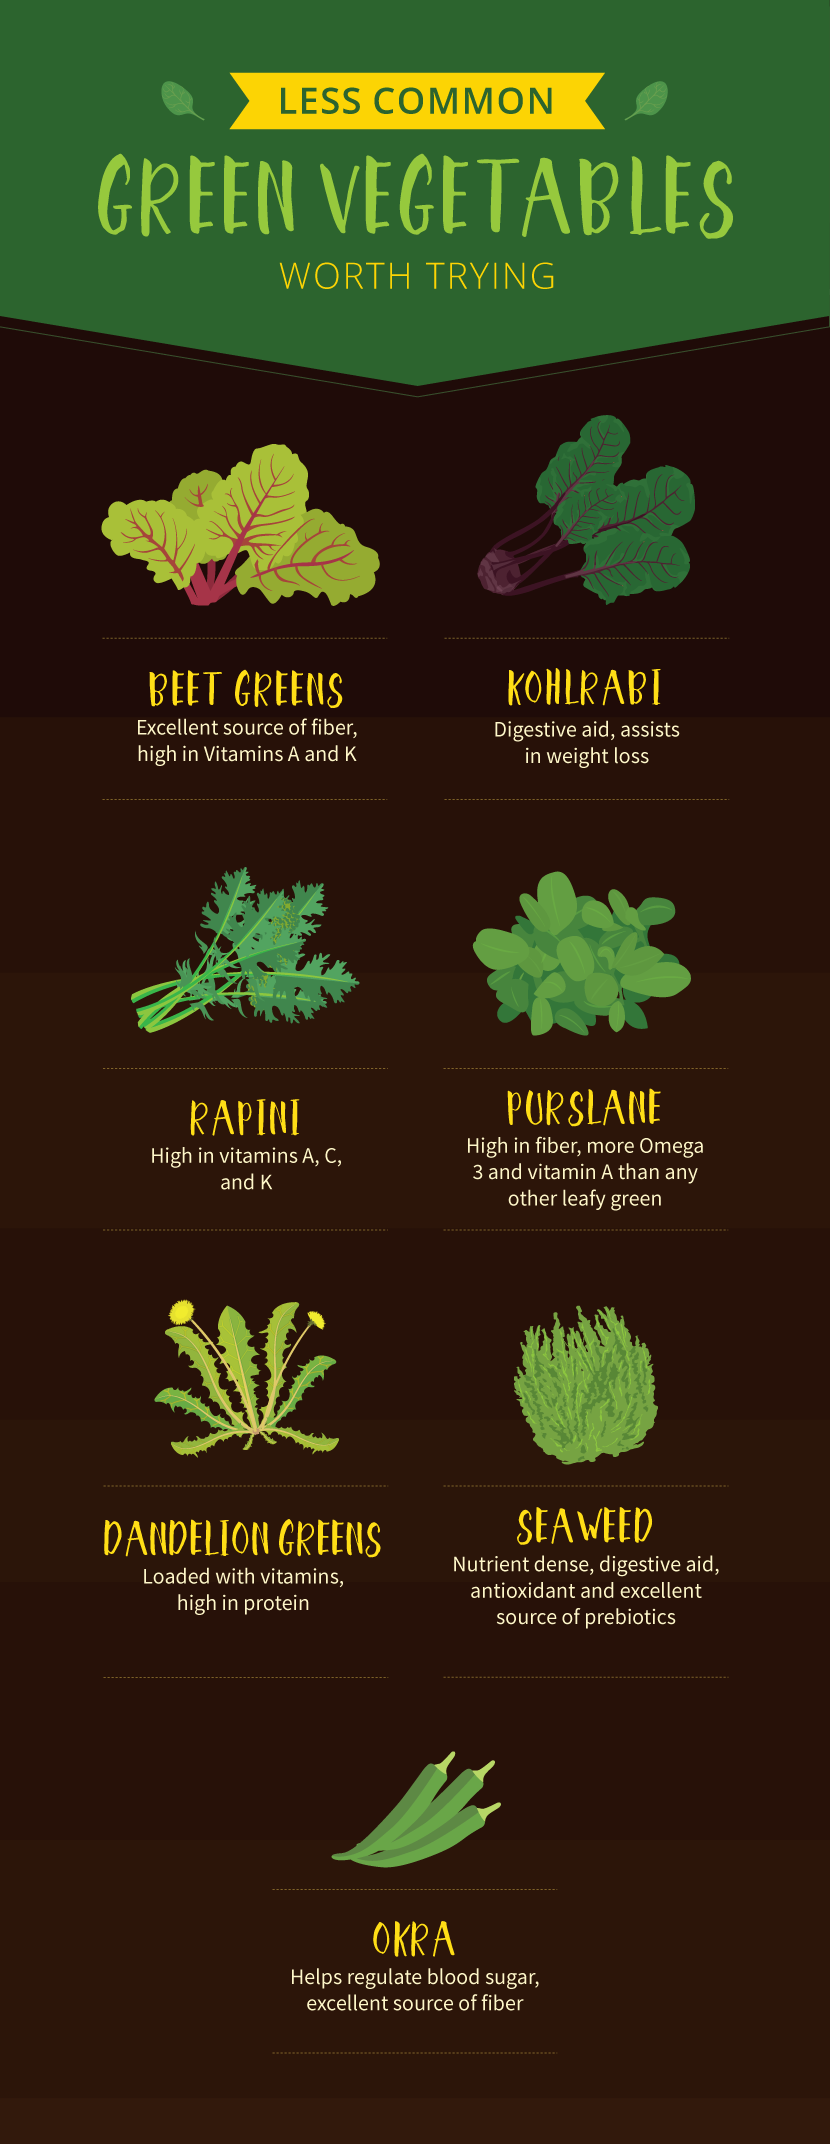 Lesser Known Green Vegetables - Try These Superfood Greens